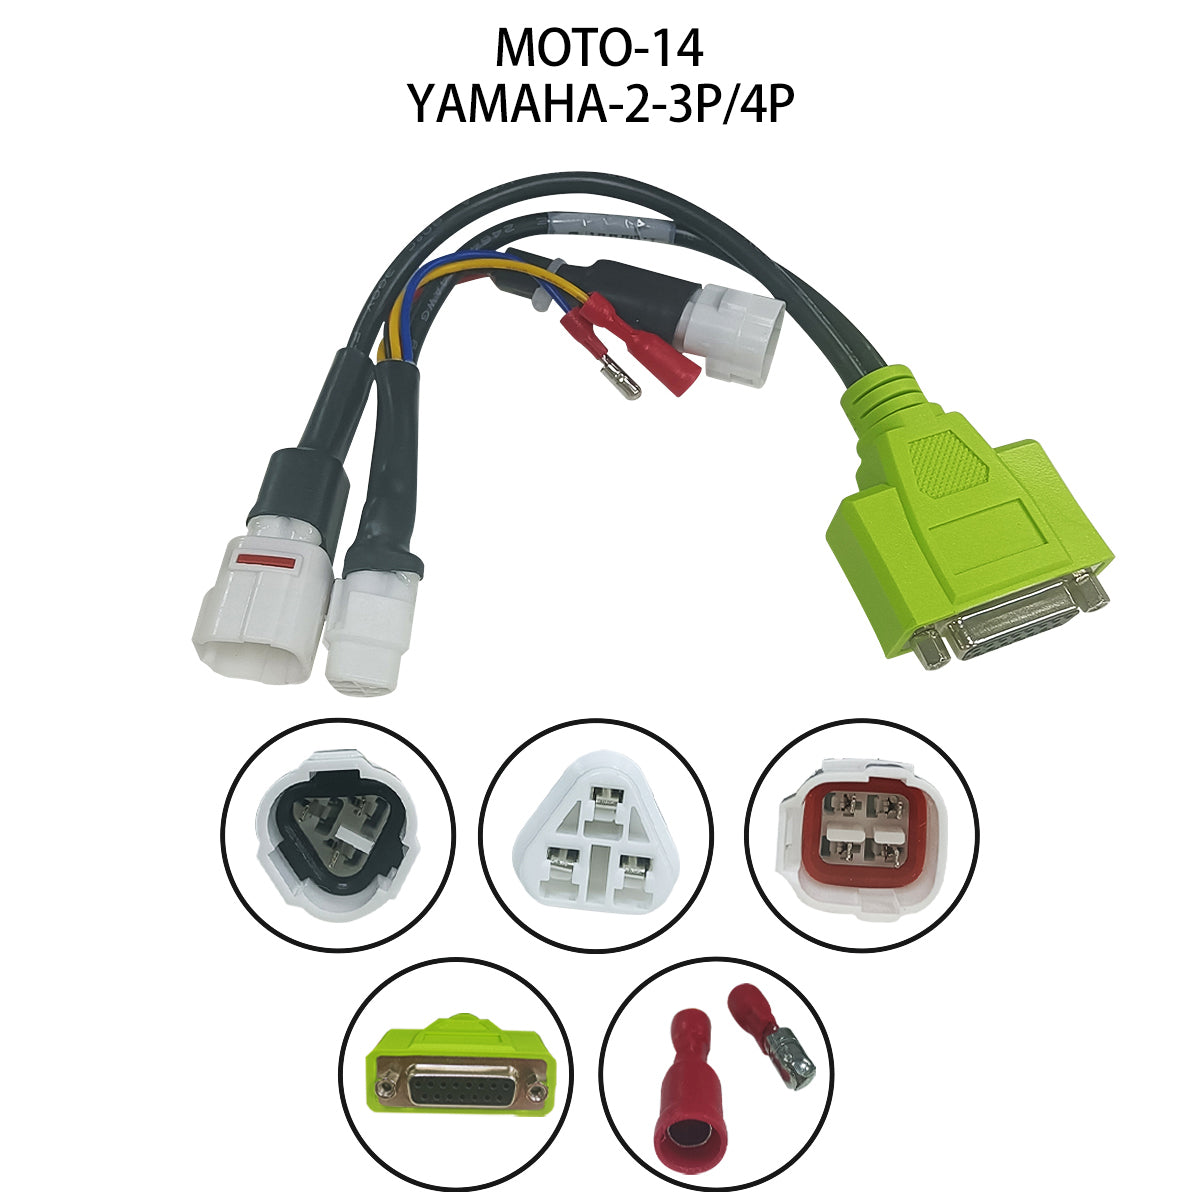 Motorcycle Test Cables for M100 / M100Pro Motor scanner Moto1-24 Cables For Different Brand Yamaha Honda KTM Test Line With Jdiag M100 Pro